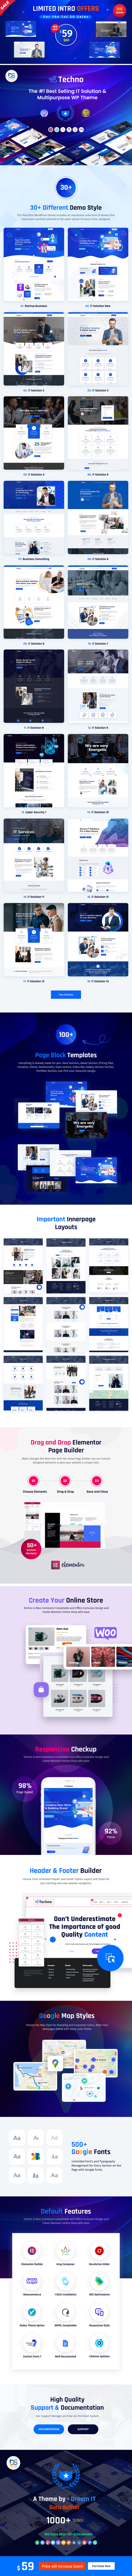 A lot of different pages of techno it solutions & business service wordpress theme.